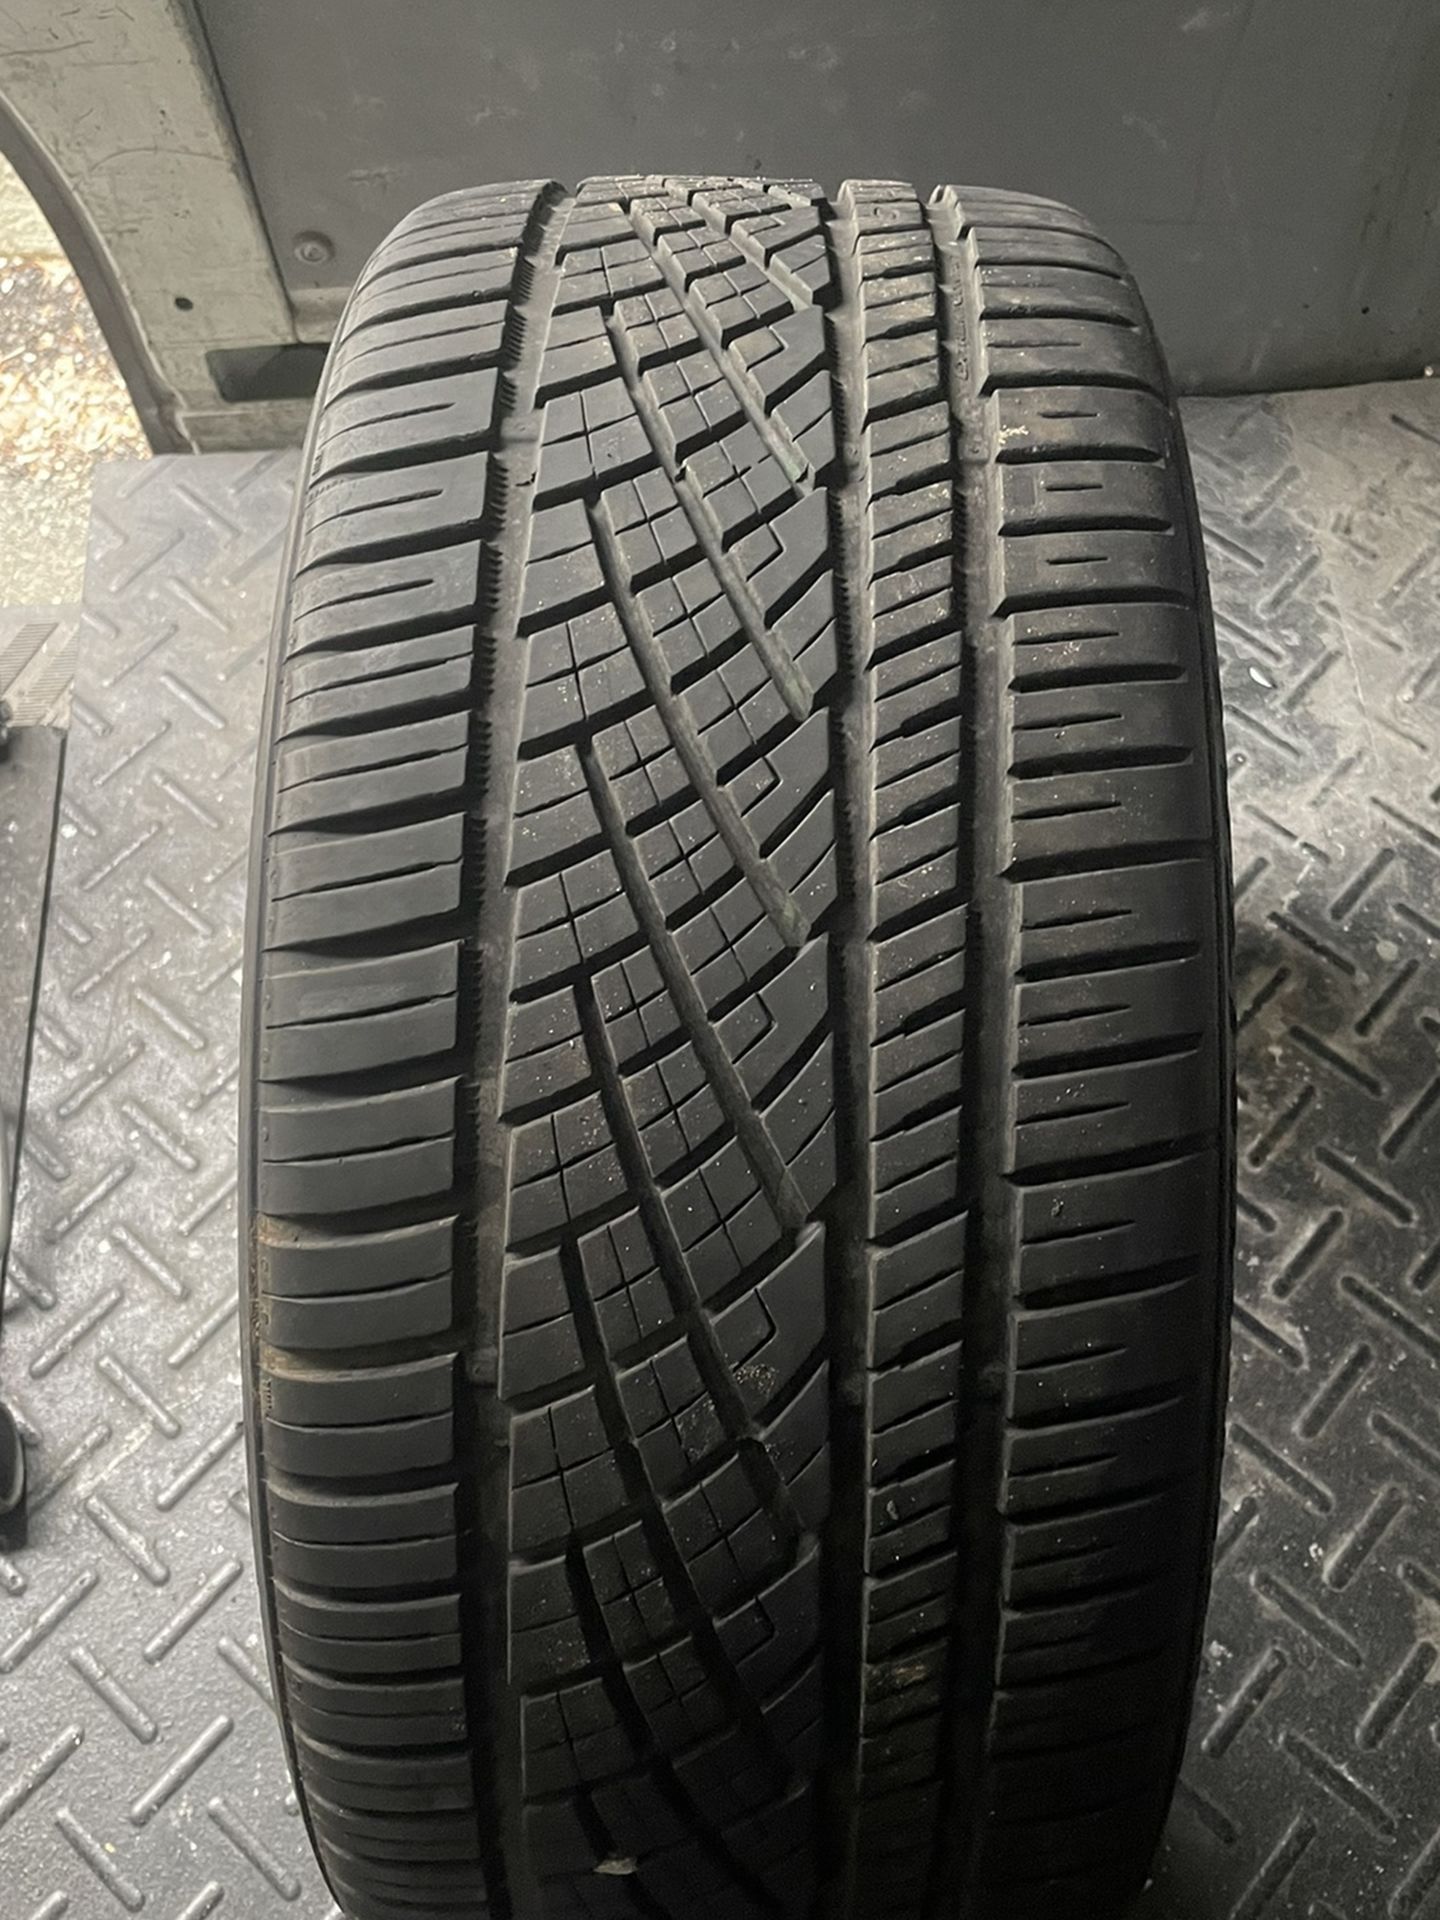 2x Continental Extreme Contact All Season Tires